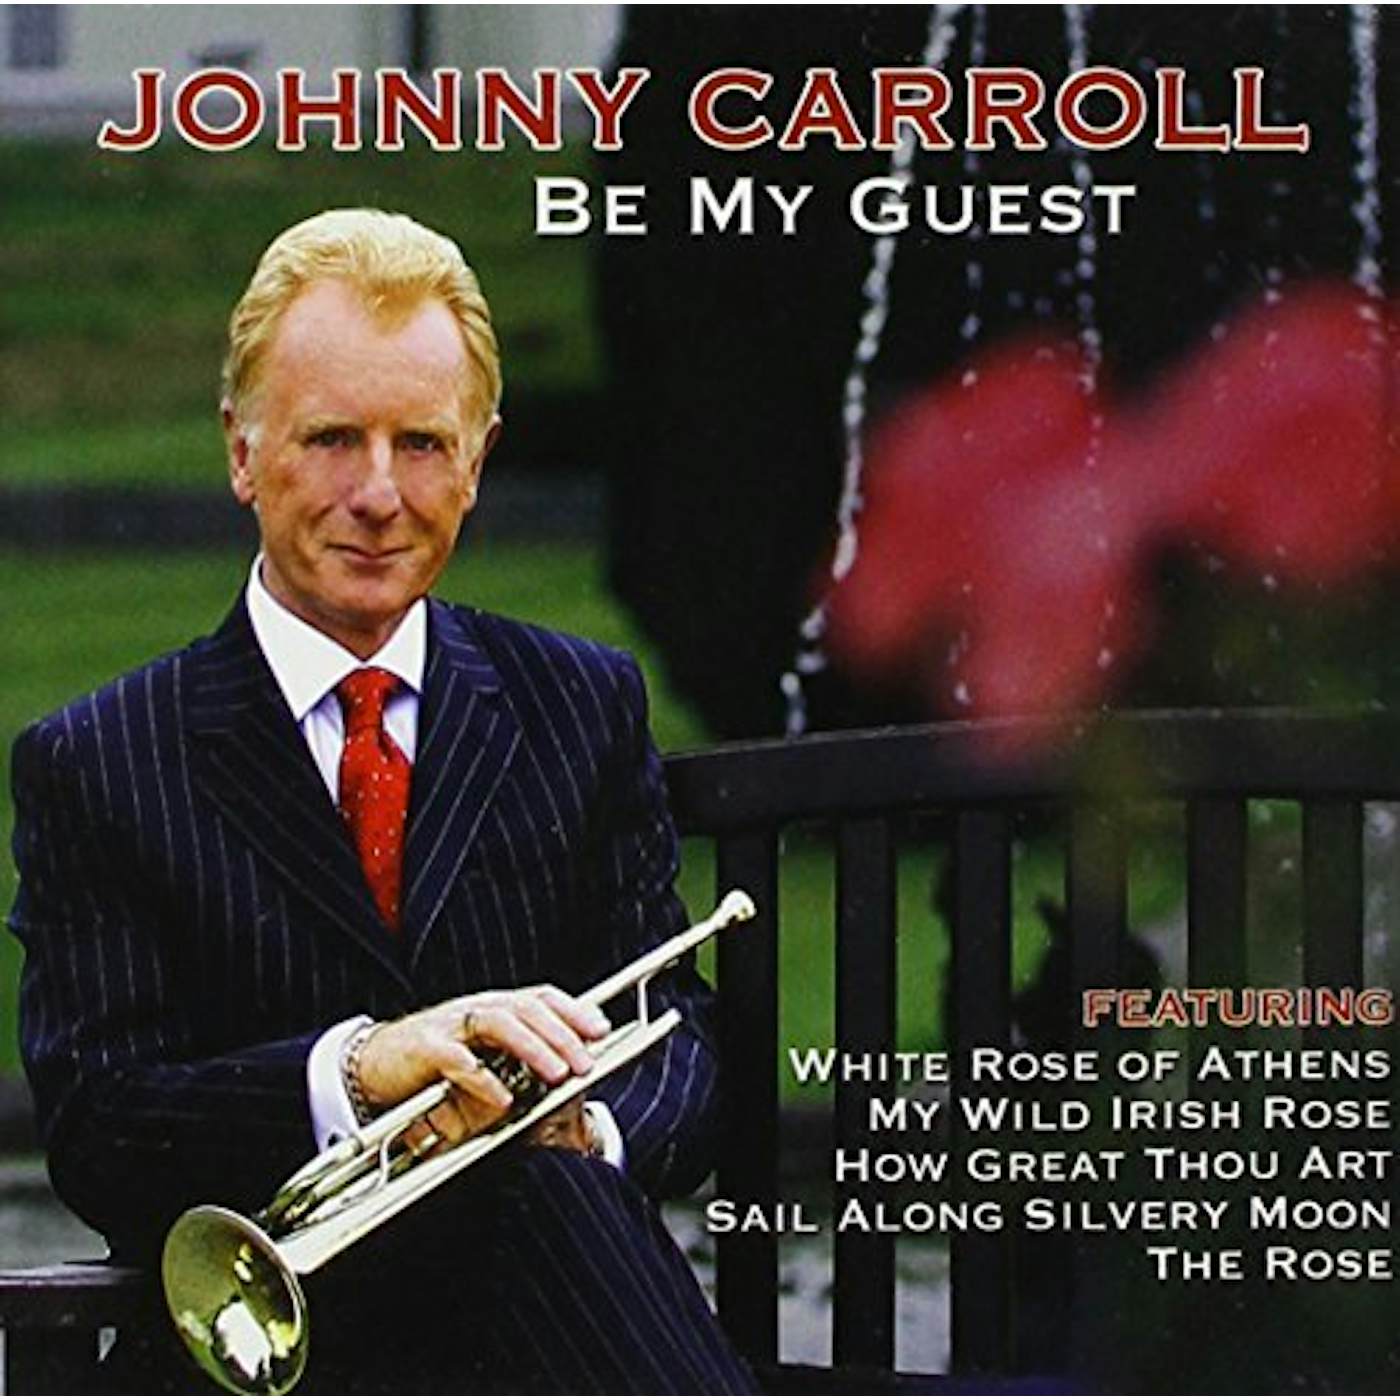 Johnny Carroll BE MY GUEST CD